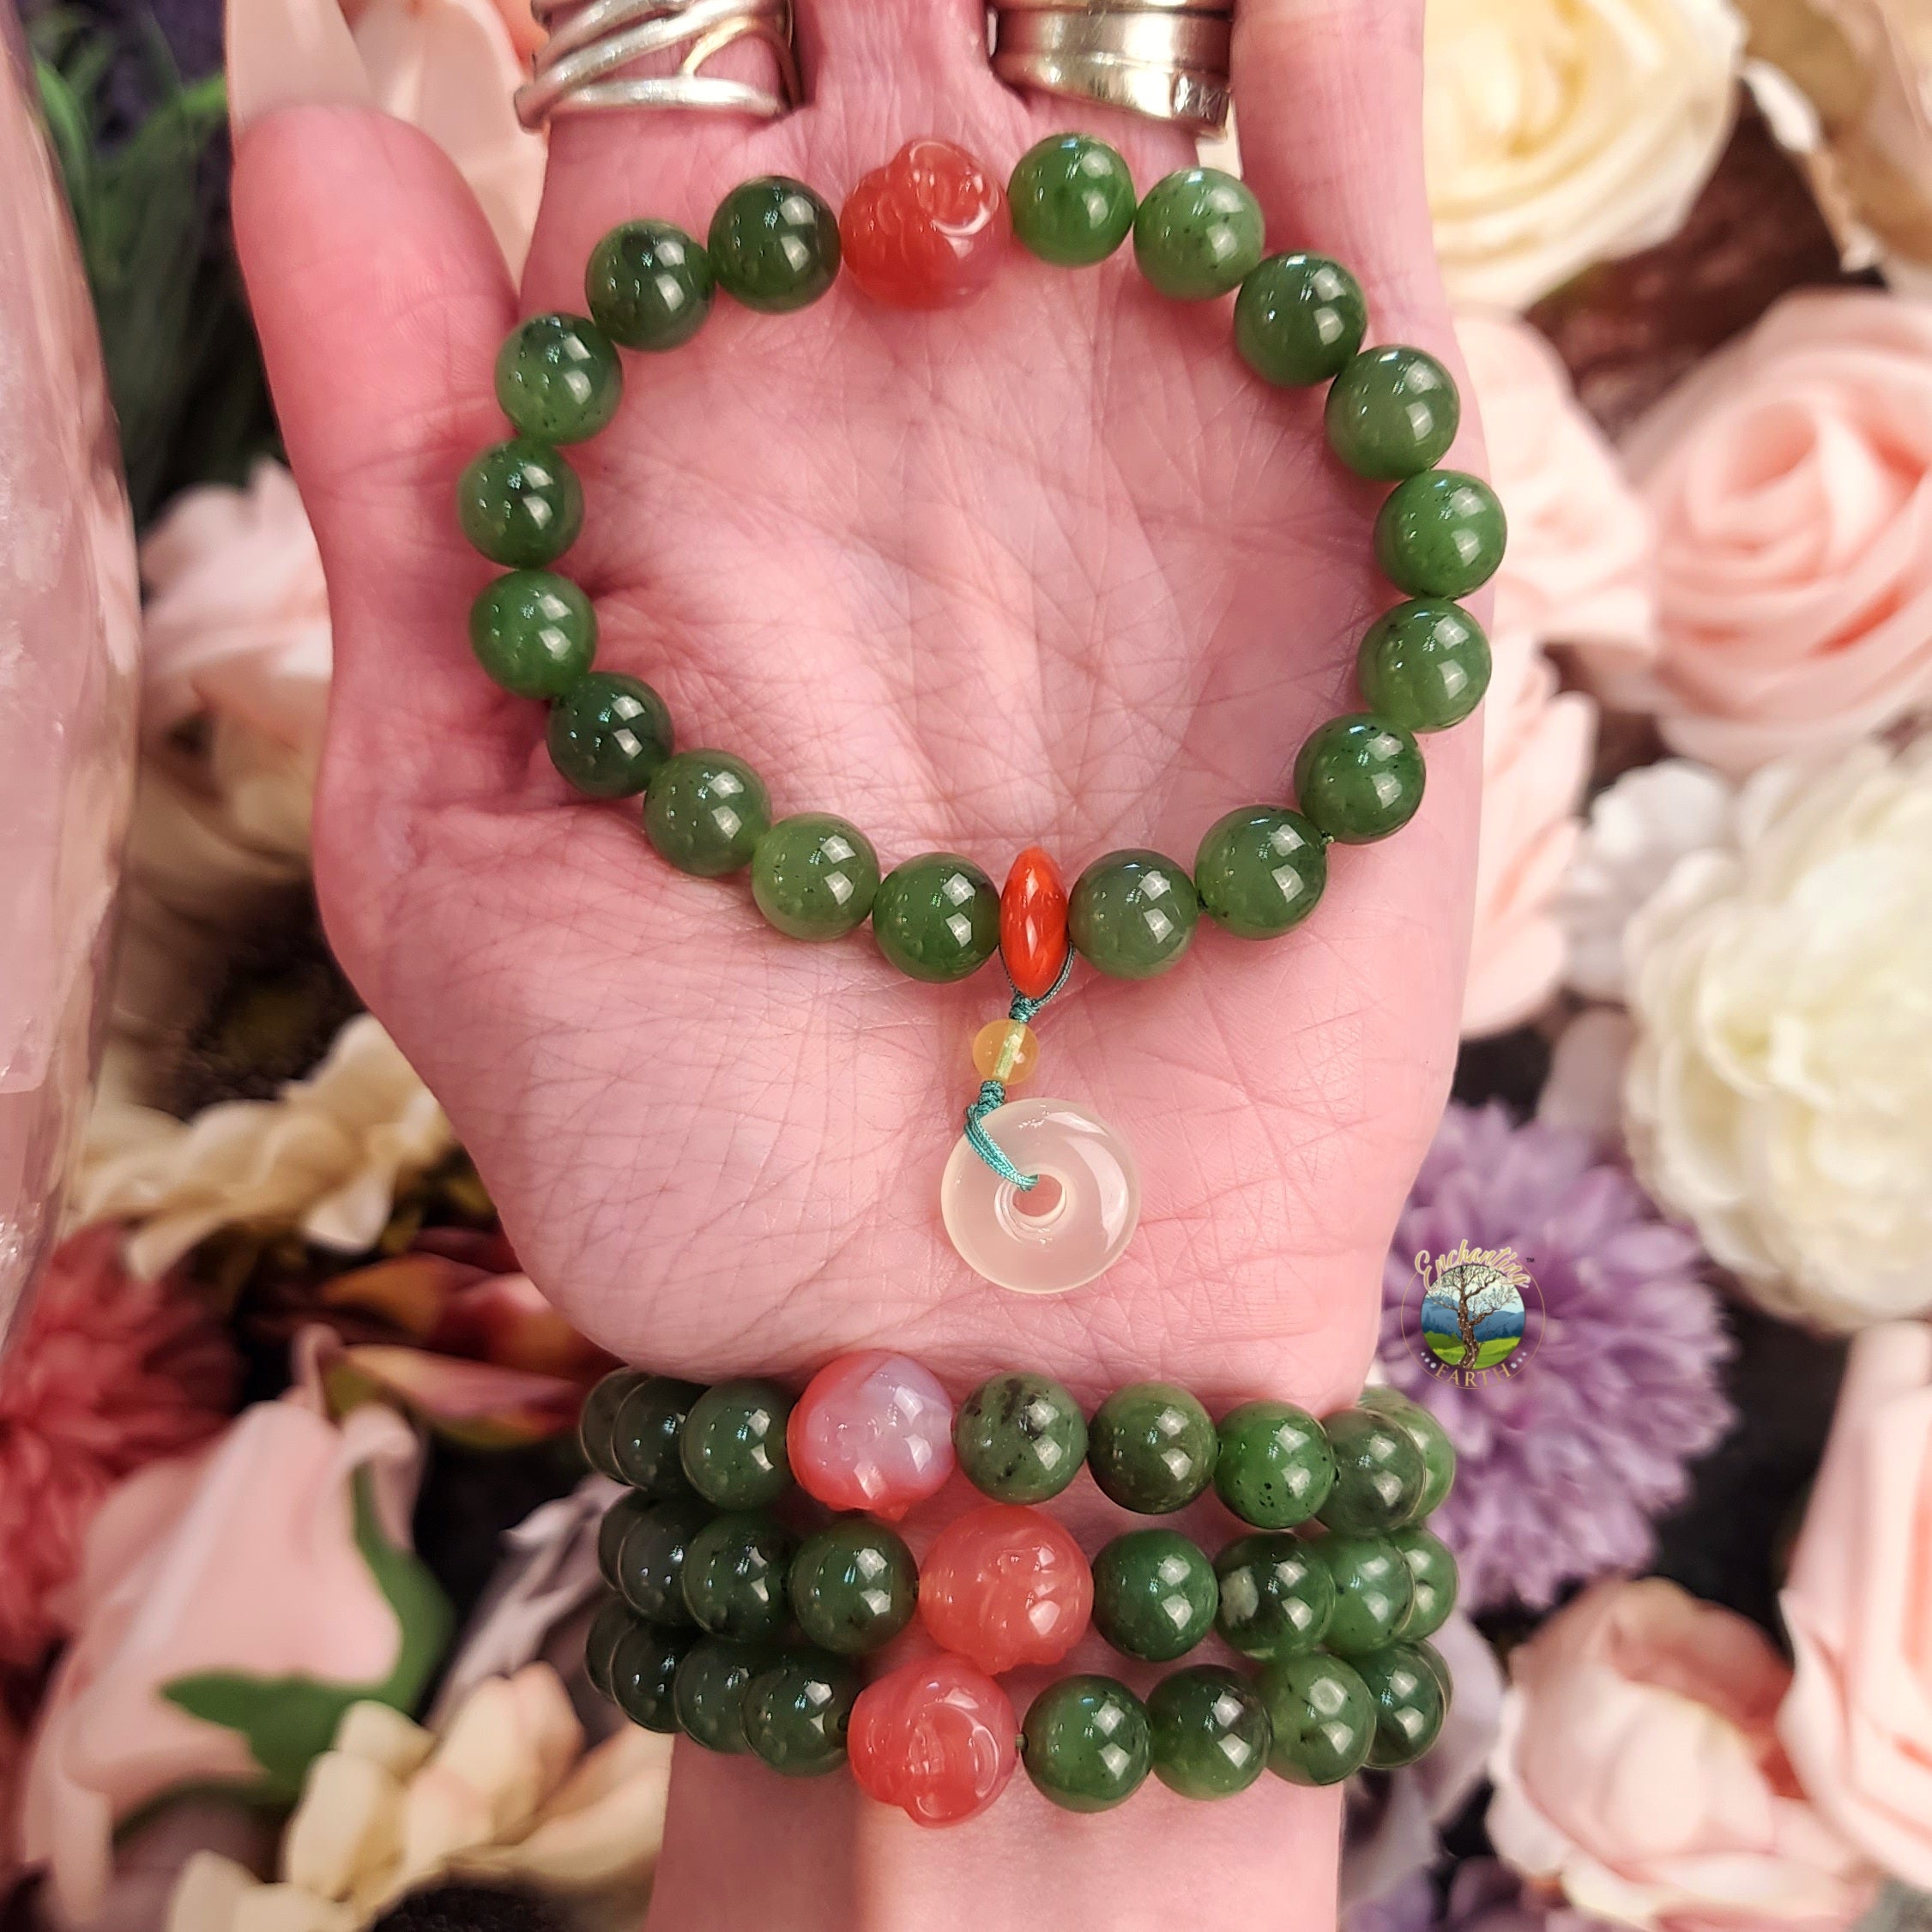 Jade with Yanyuan Agate Buddha Bracelet for Abundance, Health and Protection